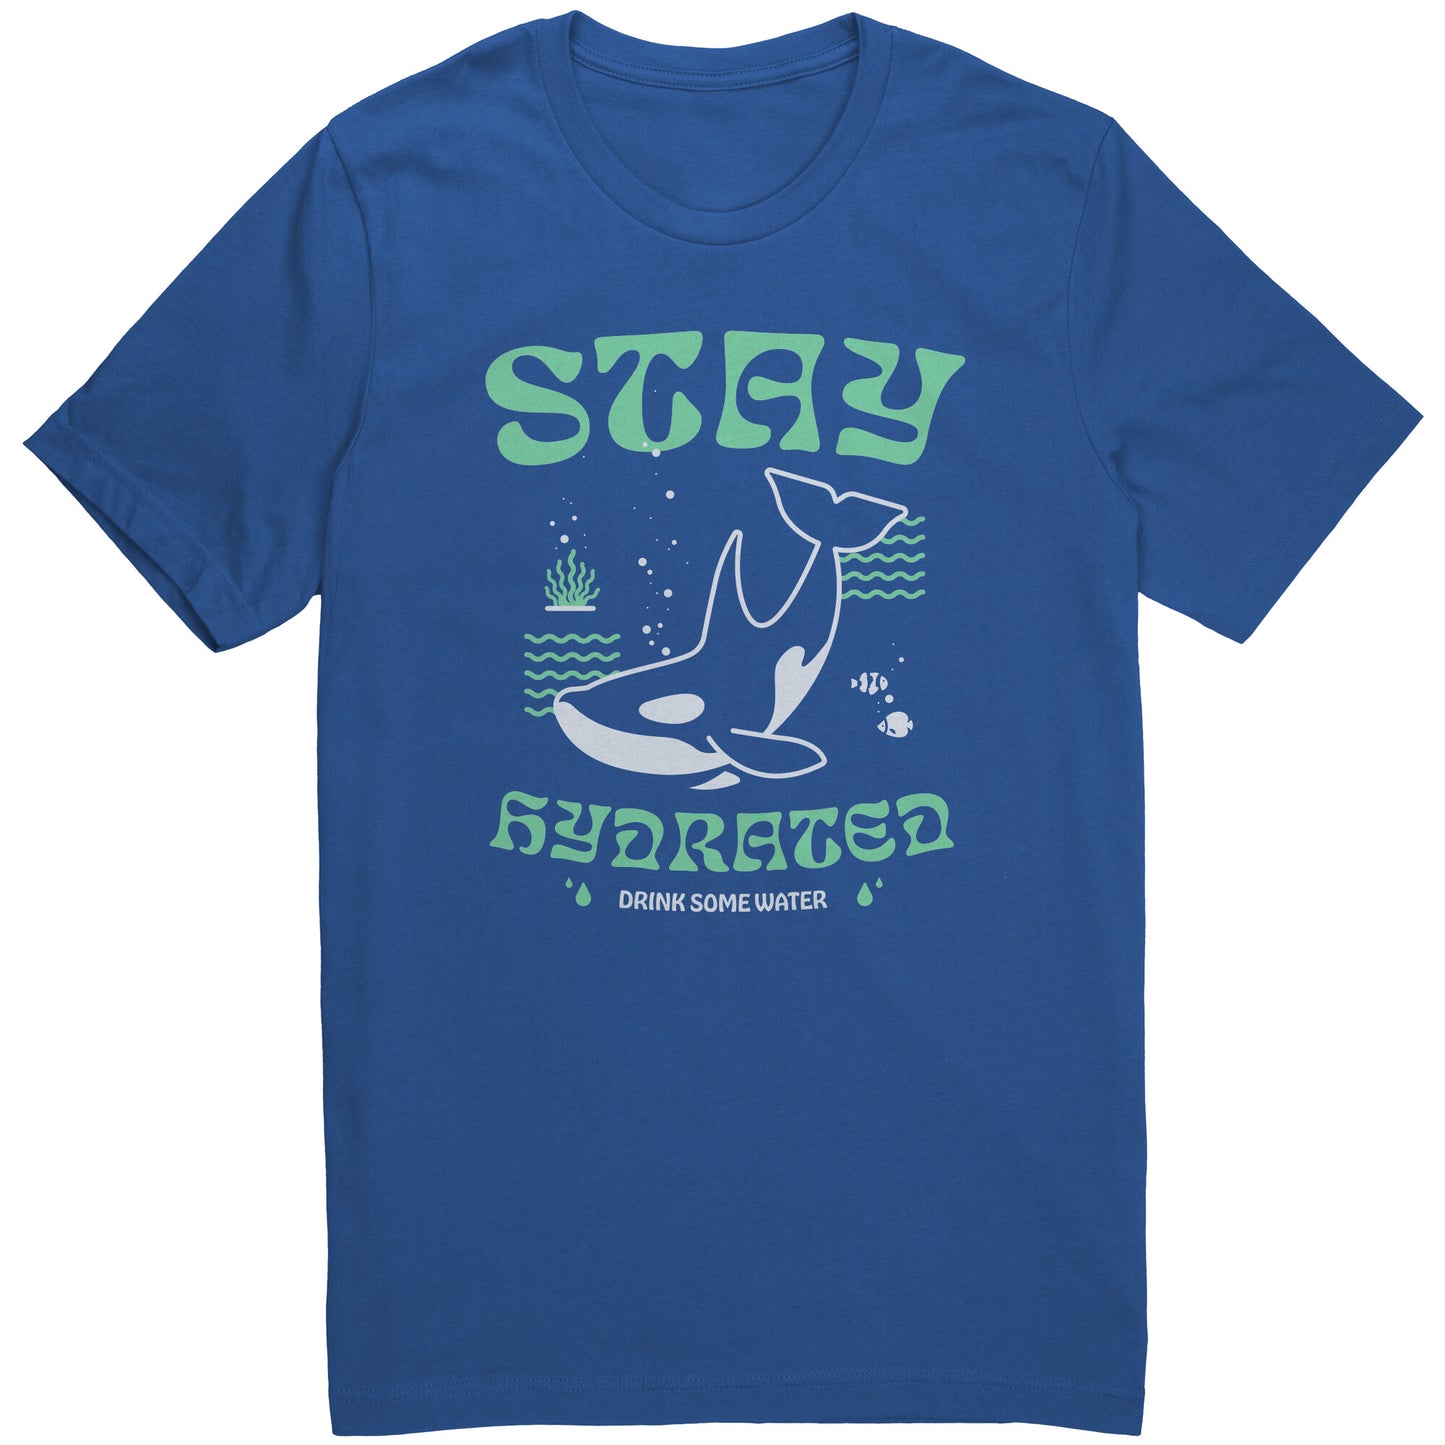 Stay Hydrated - T Shirt